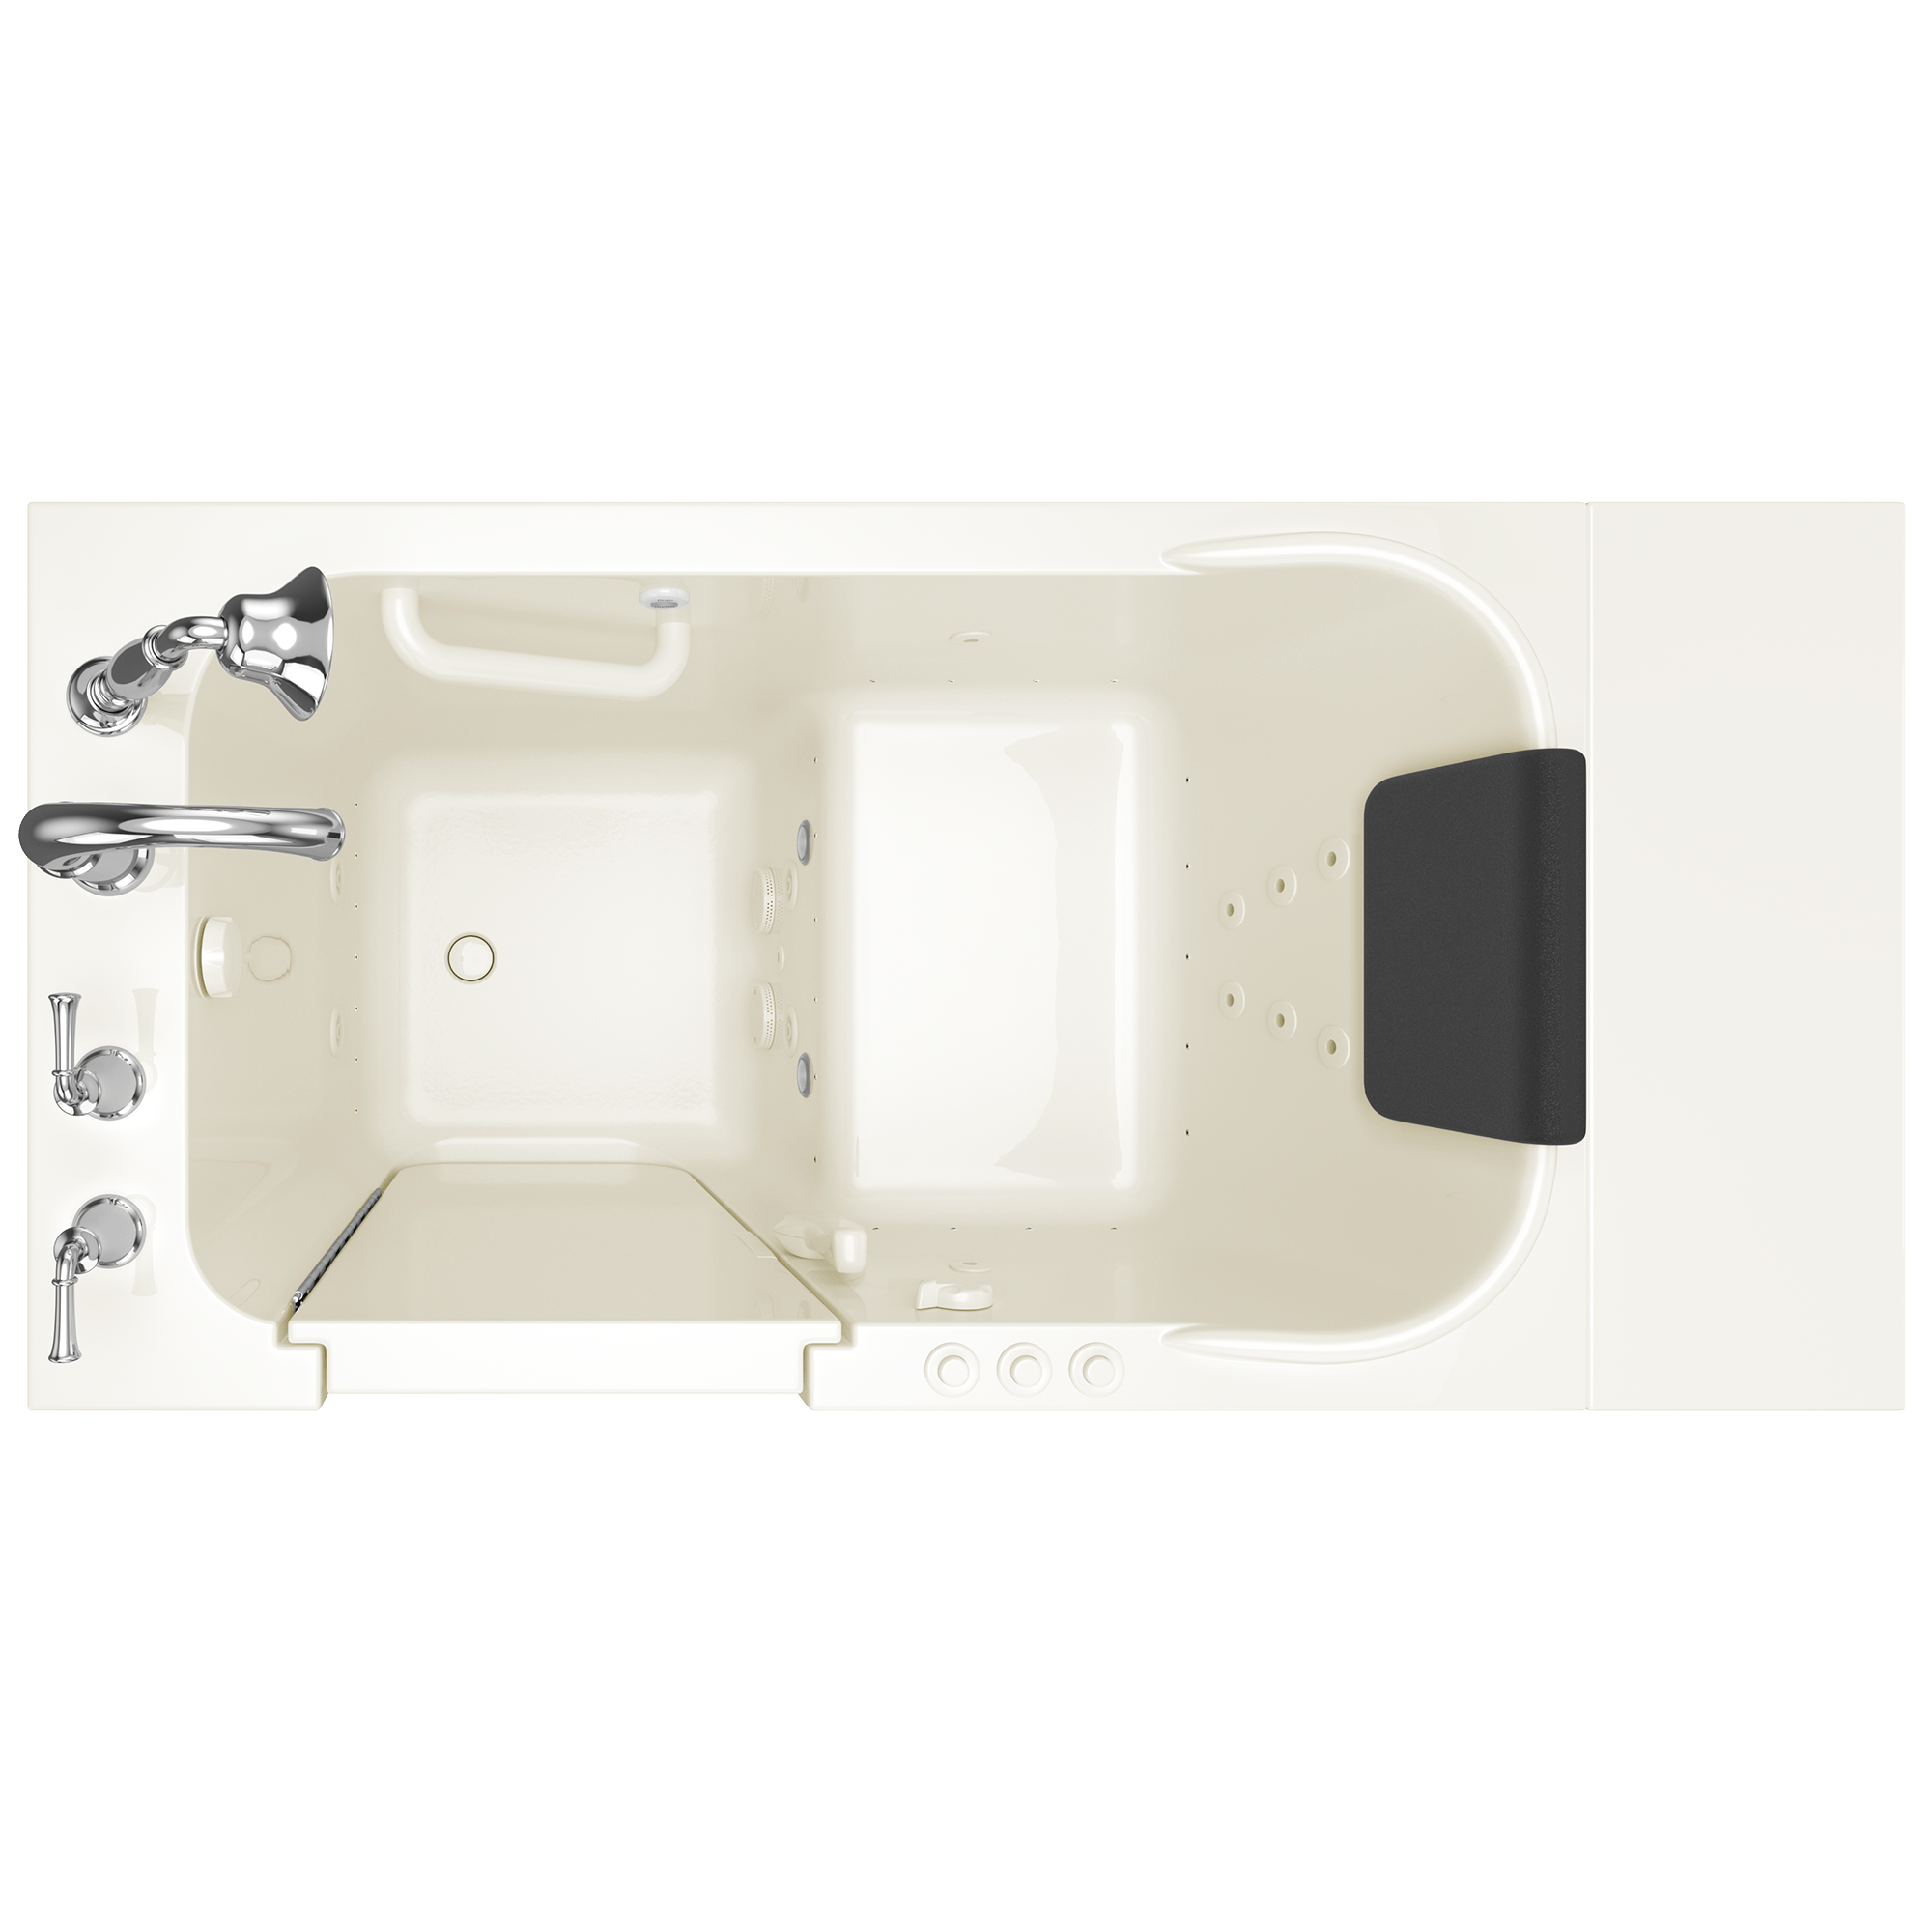 Gelcoat Premium Series 48x28 Inch Walk-In Bathtub with Dual Air Massage and Jet Massage System - Left Hand Door and Drain